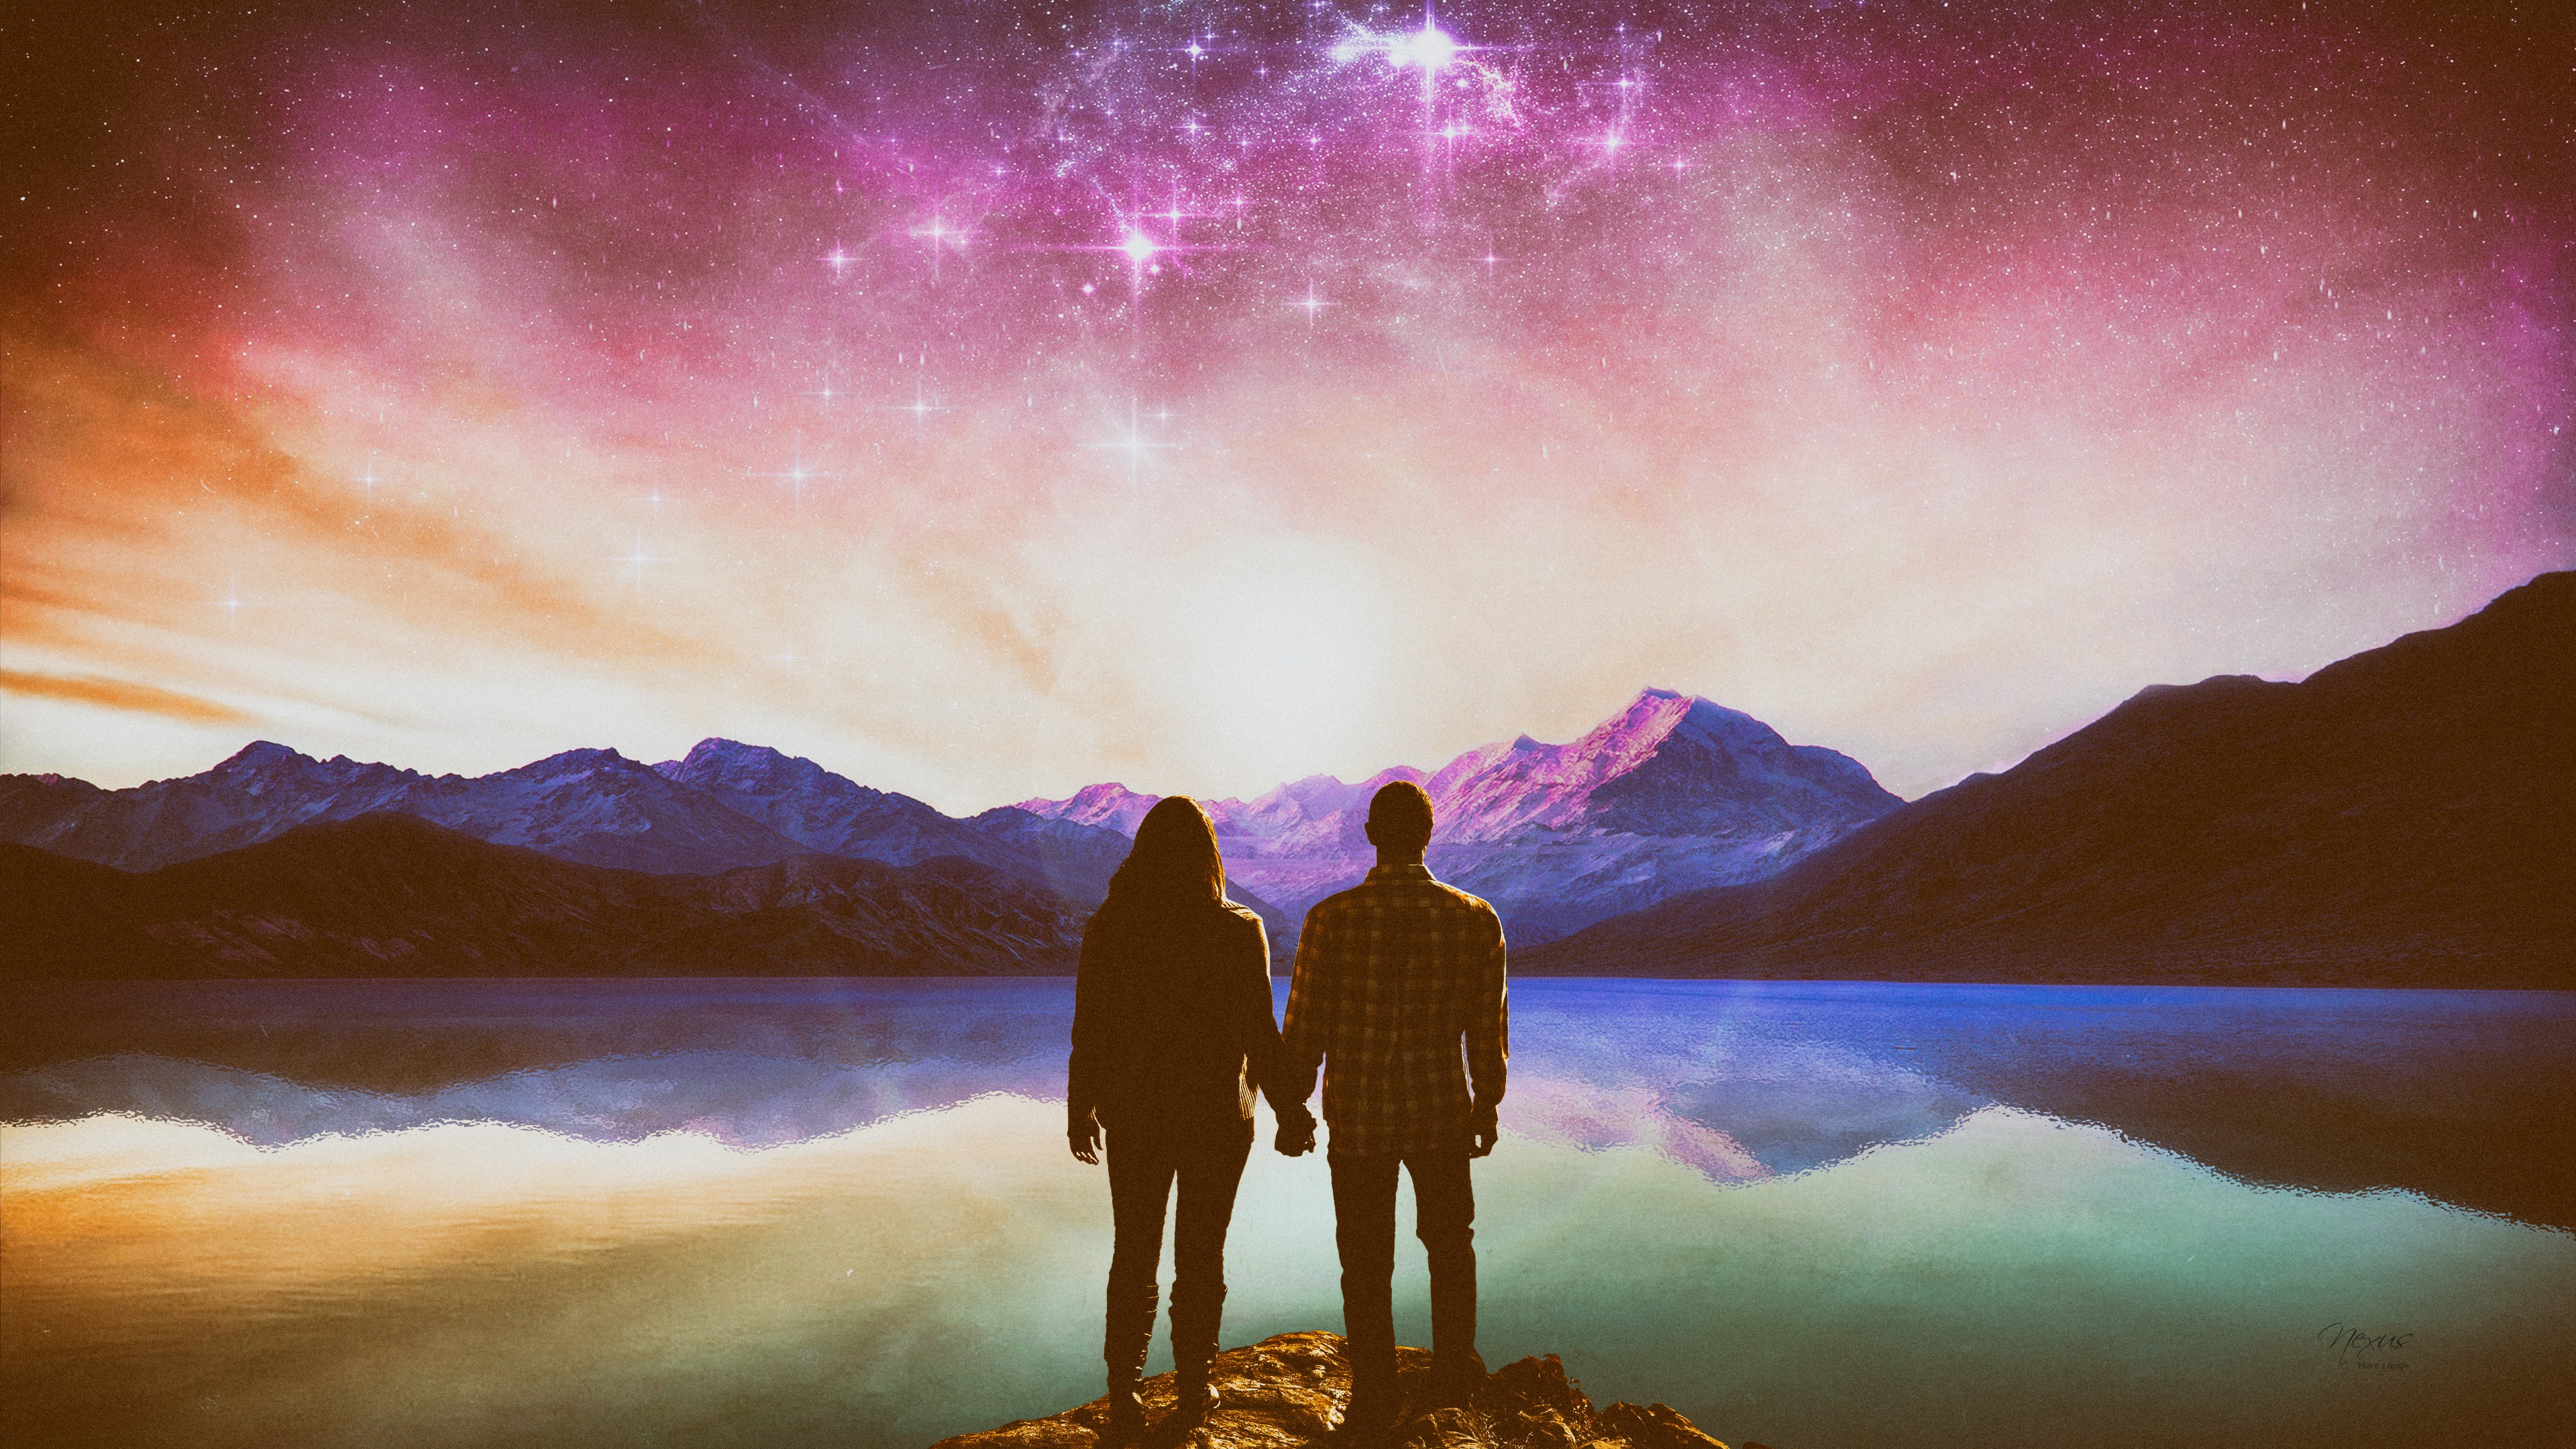 General 3840x2160 artwork lake couple mountains landscape sky stars holding hands nature reflection water